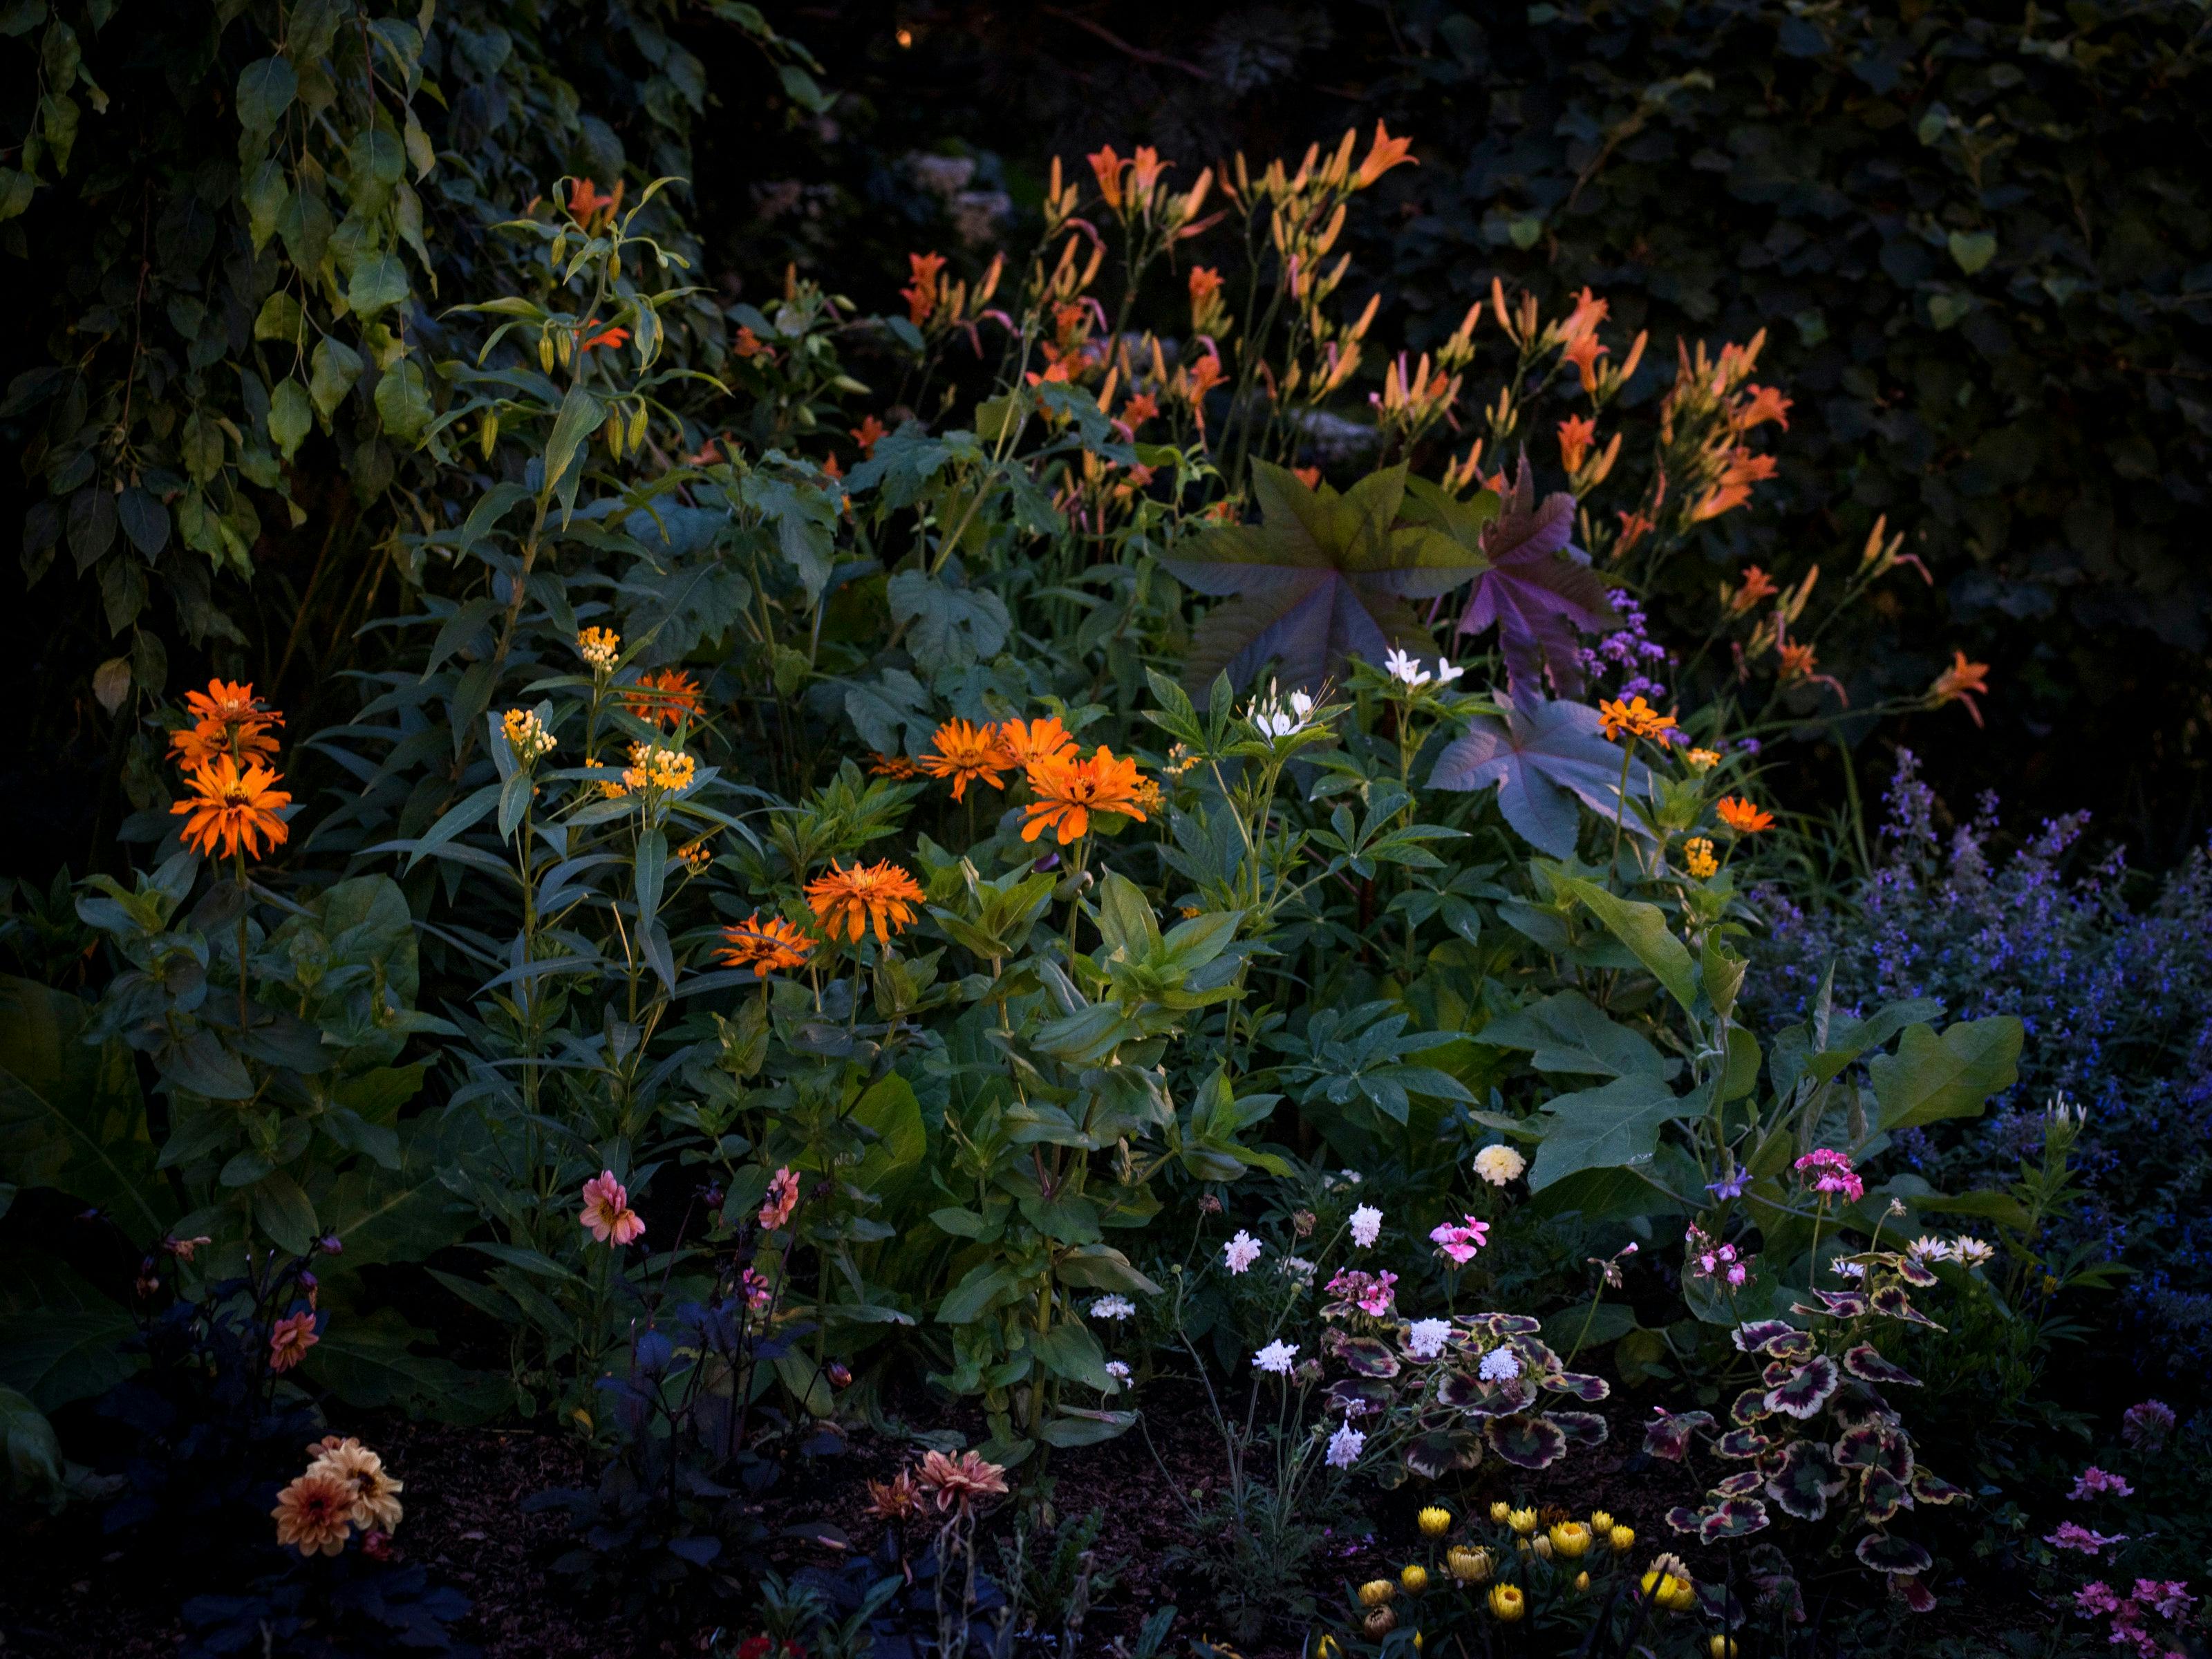 Photography by Anna Beeke titled "Midnight in the Garden #212".